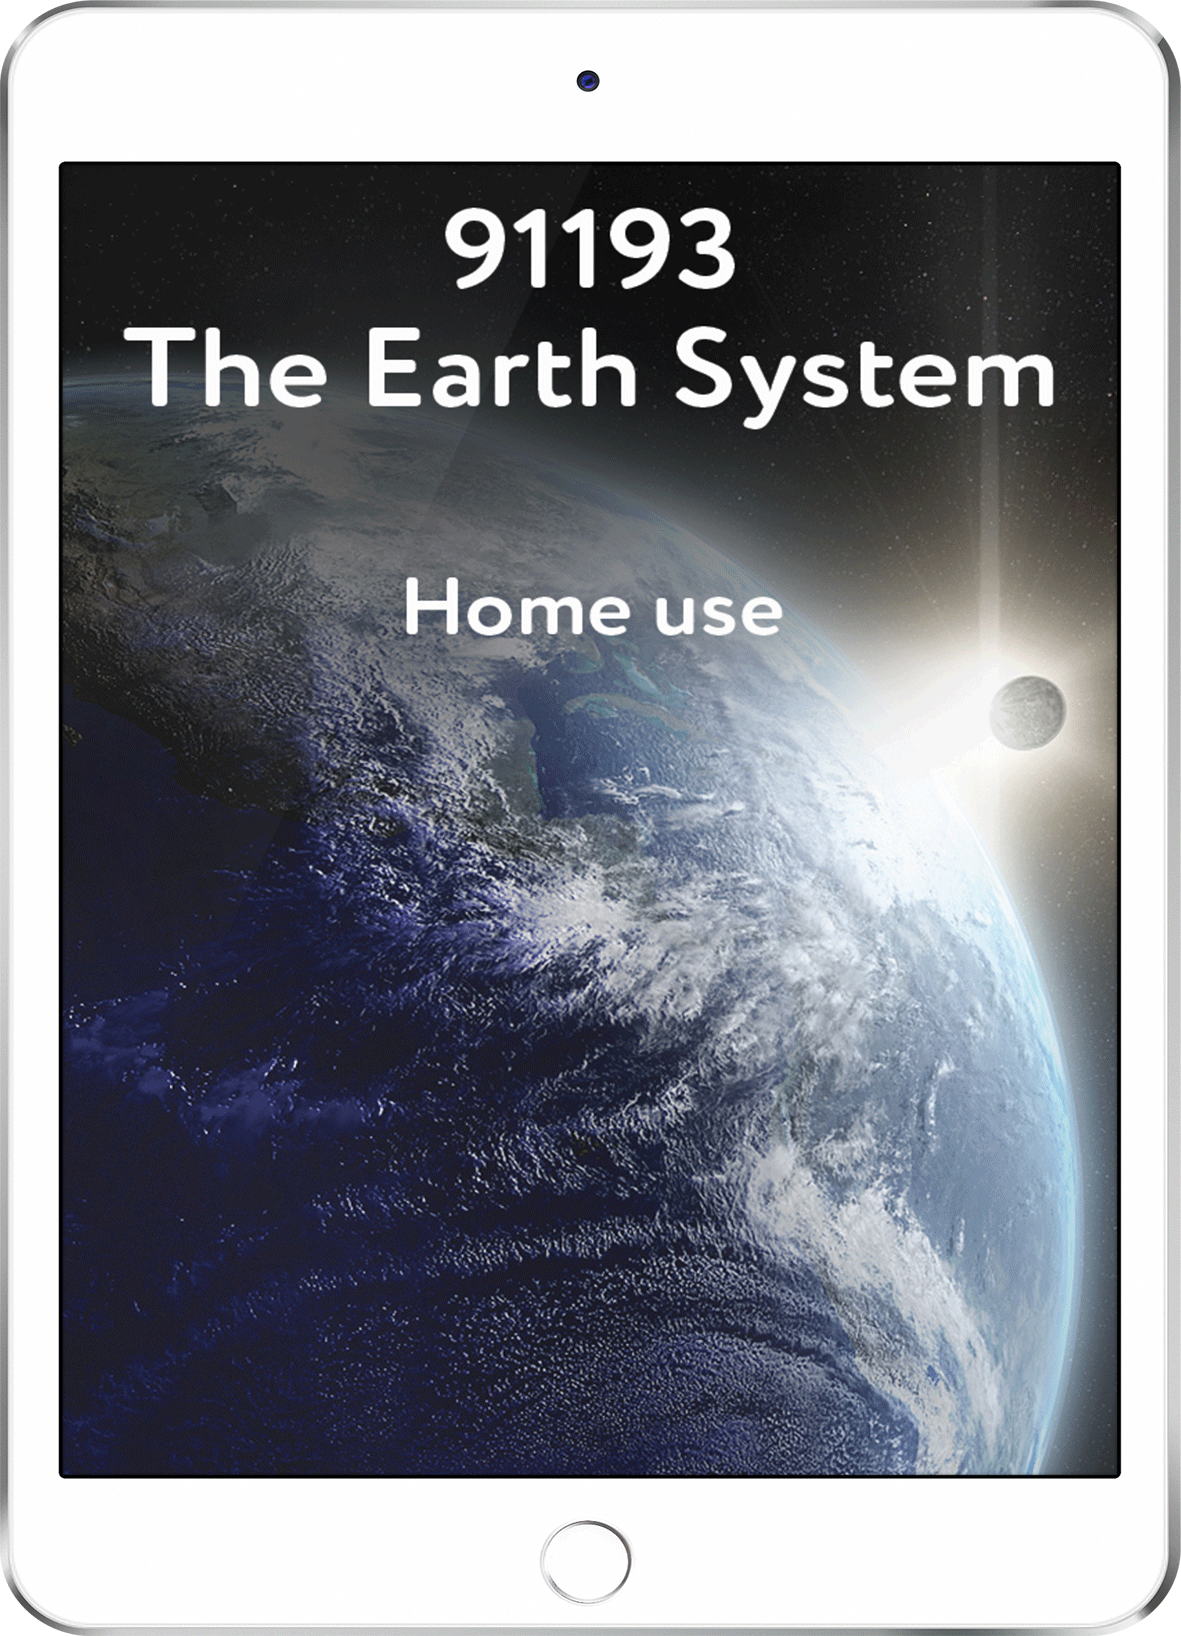 91193 The Earth System - Home Use